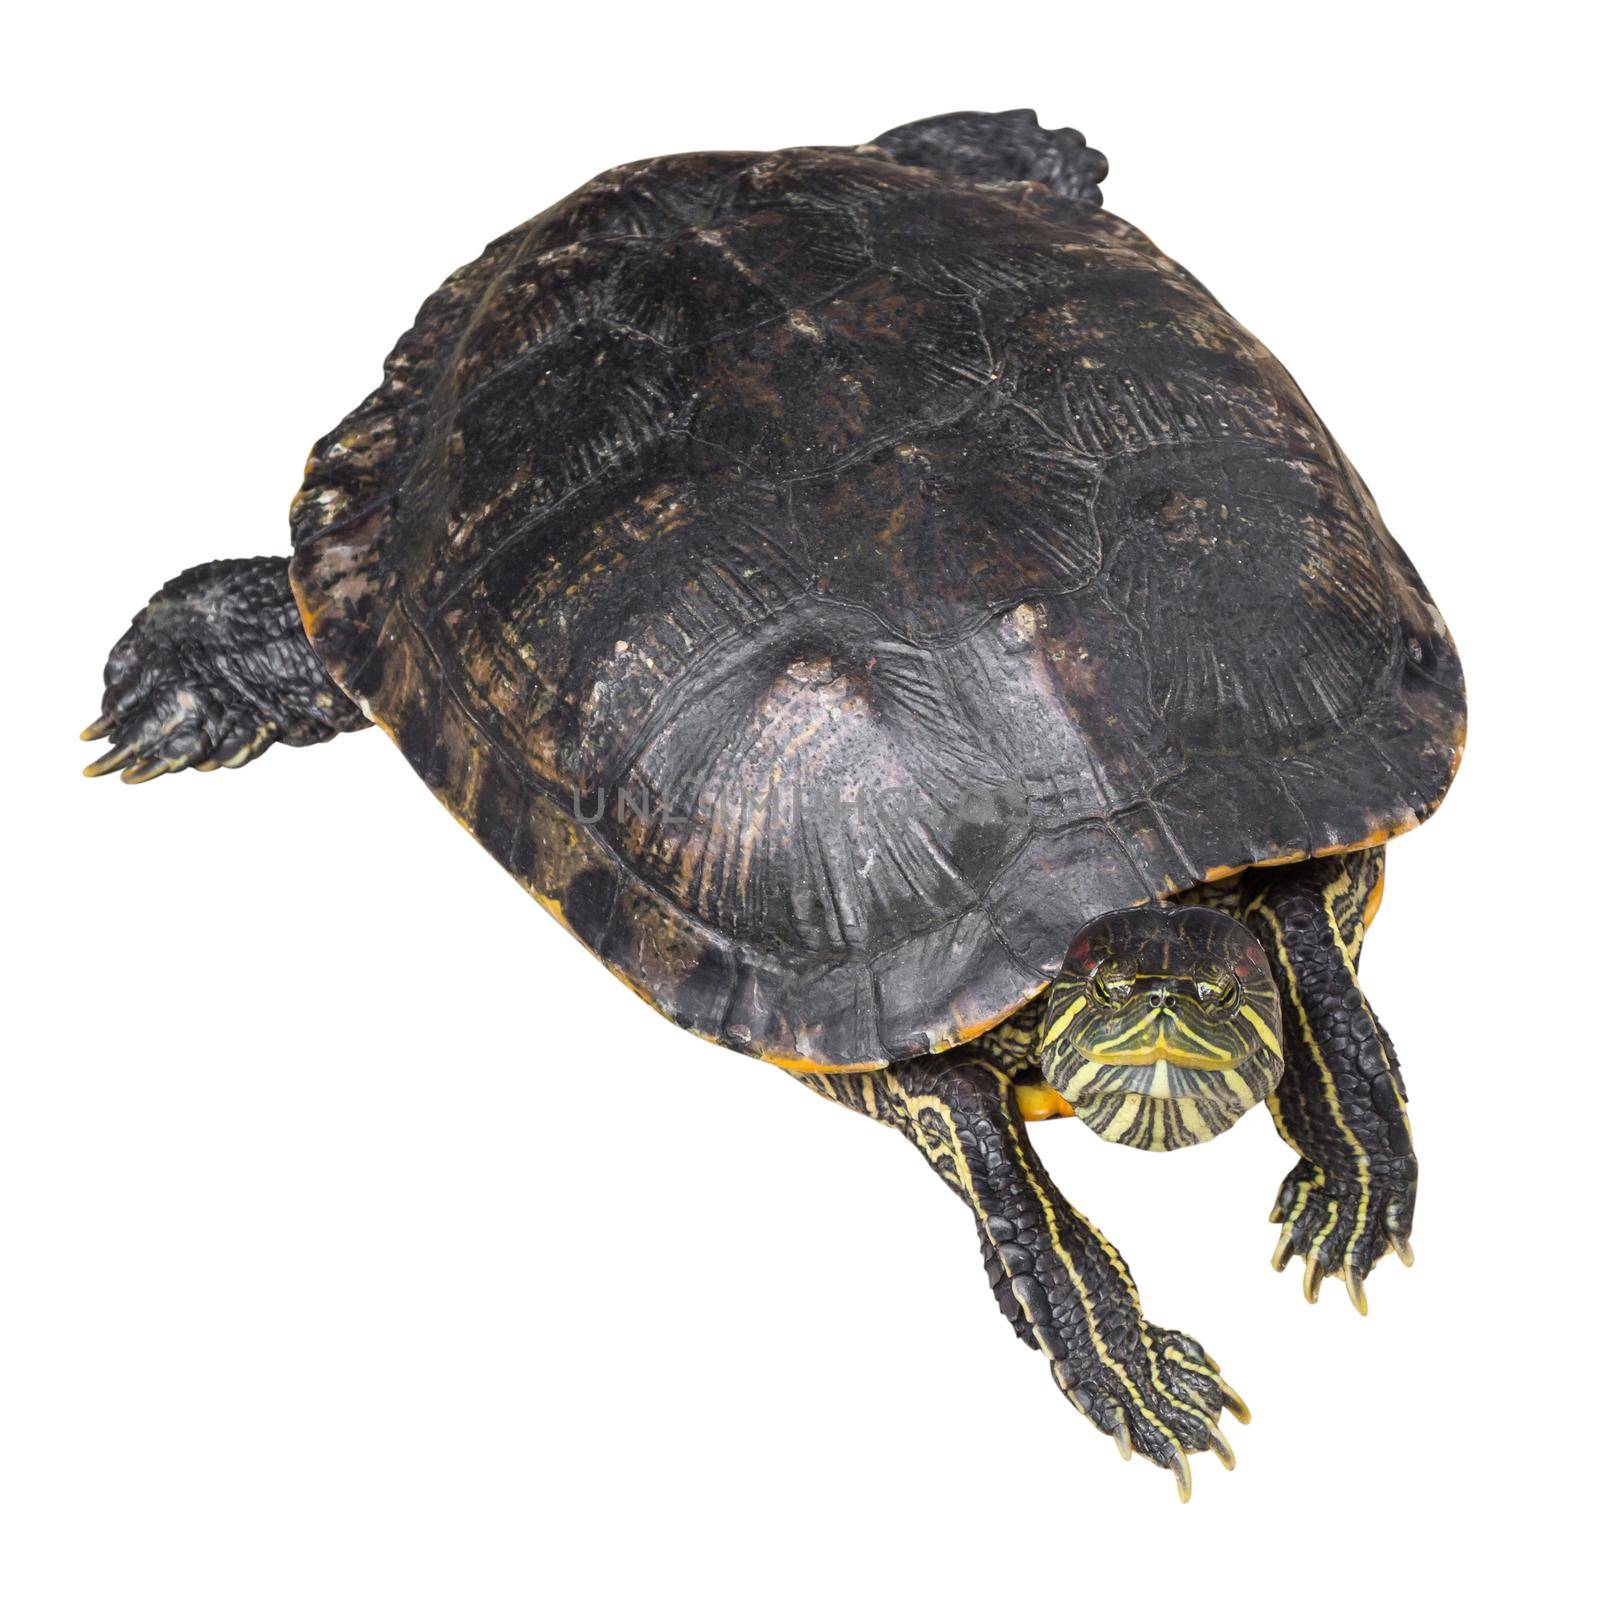 Red eared slider turtle ( Trachemys scripta elegans ) is creeping and raise one's head on white isolated background . Top view . by stockdevil